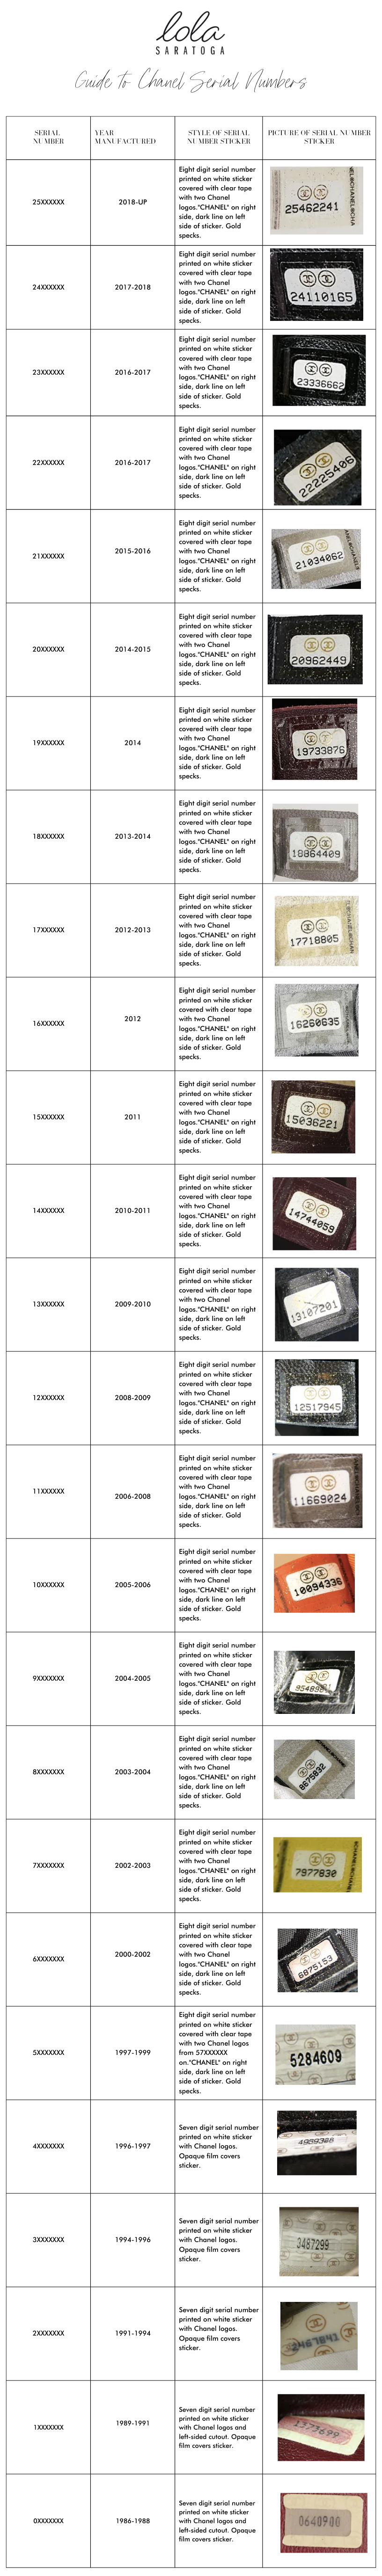 Lola's Guide to Chanel Serial Numbers